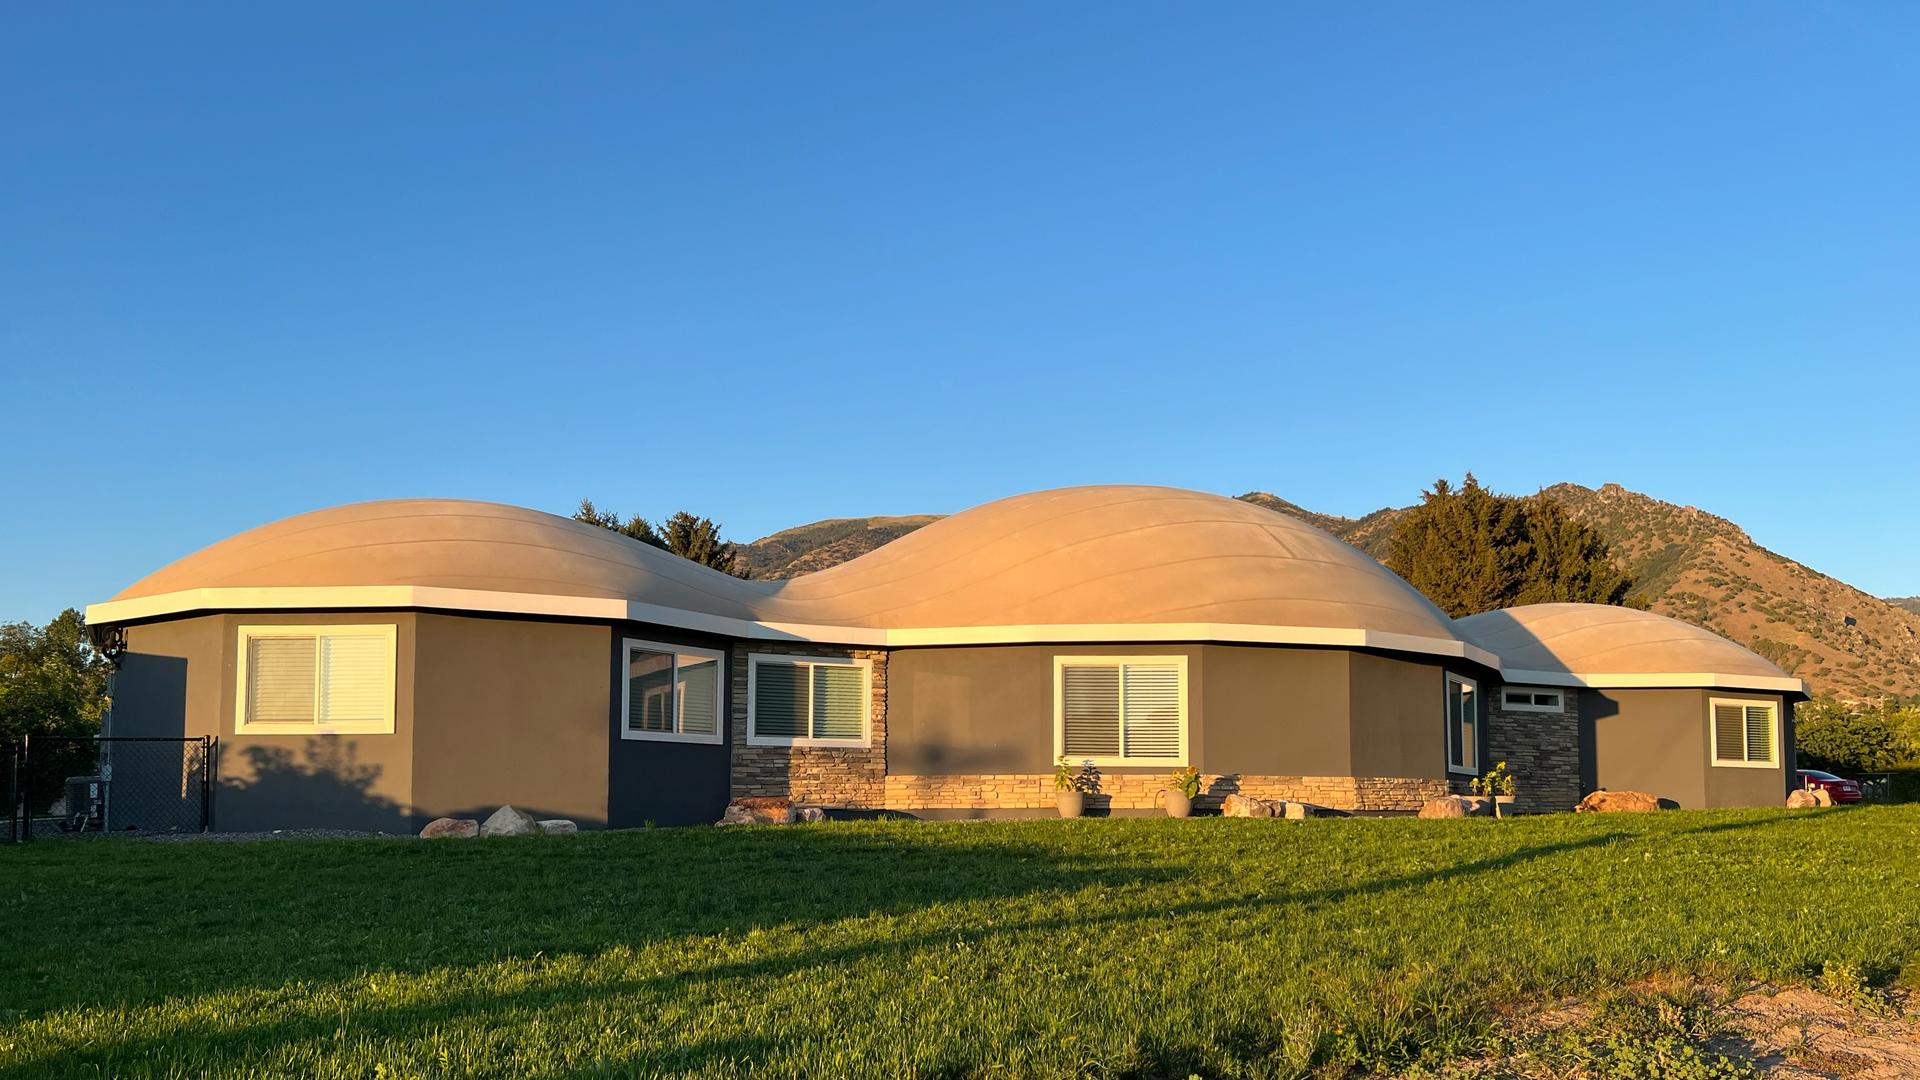 Arcadia Dome Home at Sunset.